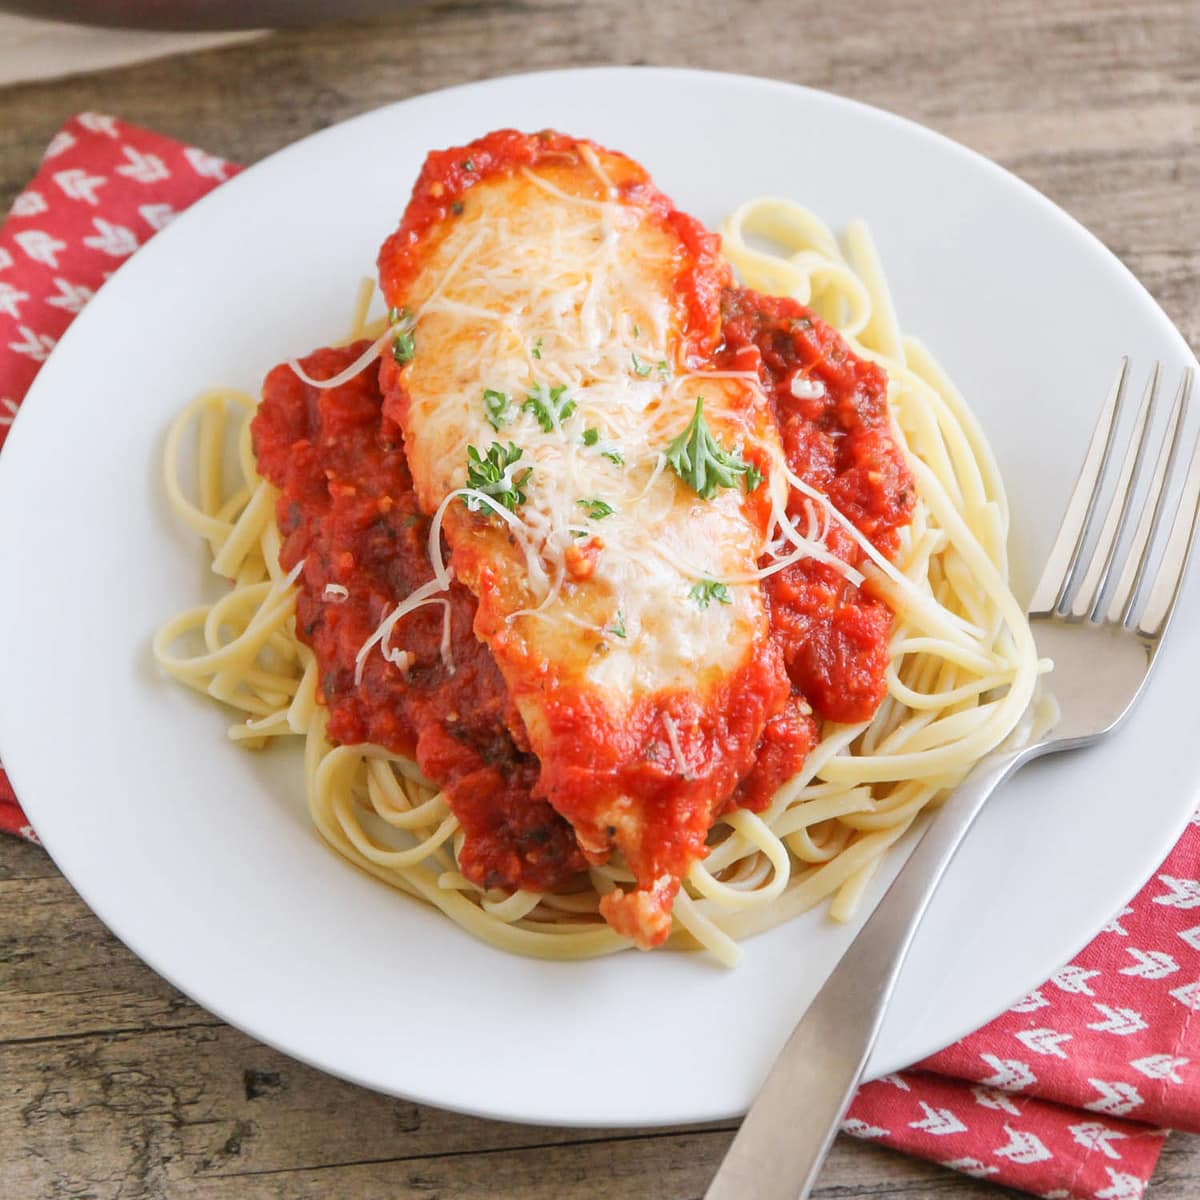 Italian Christmas Dinner ideas - chicken parmigiana on top of a bed of pasta.